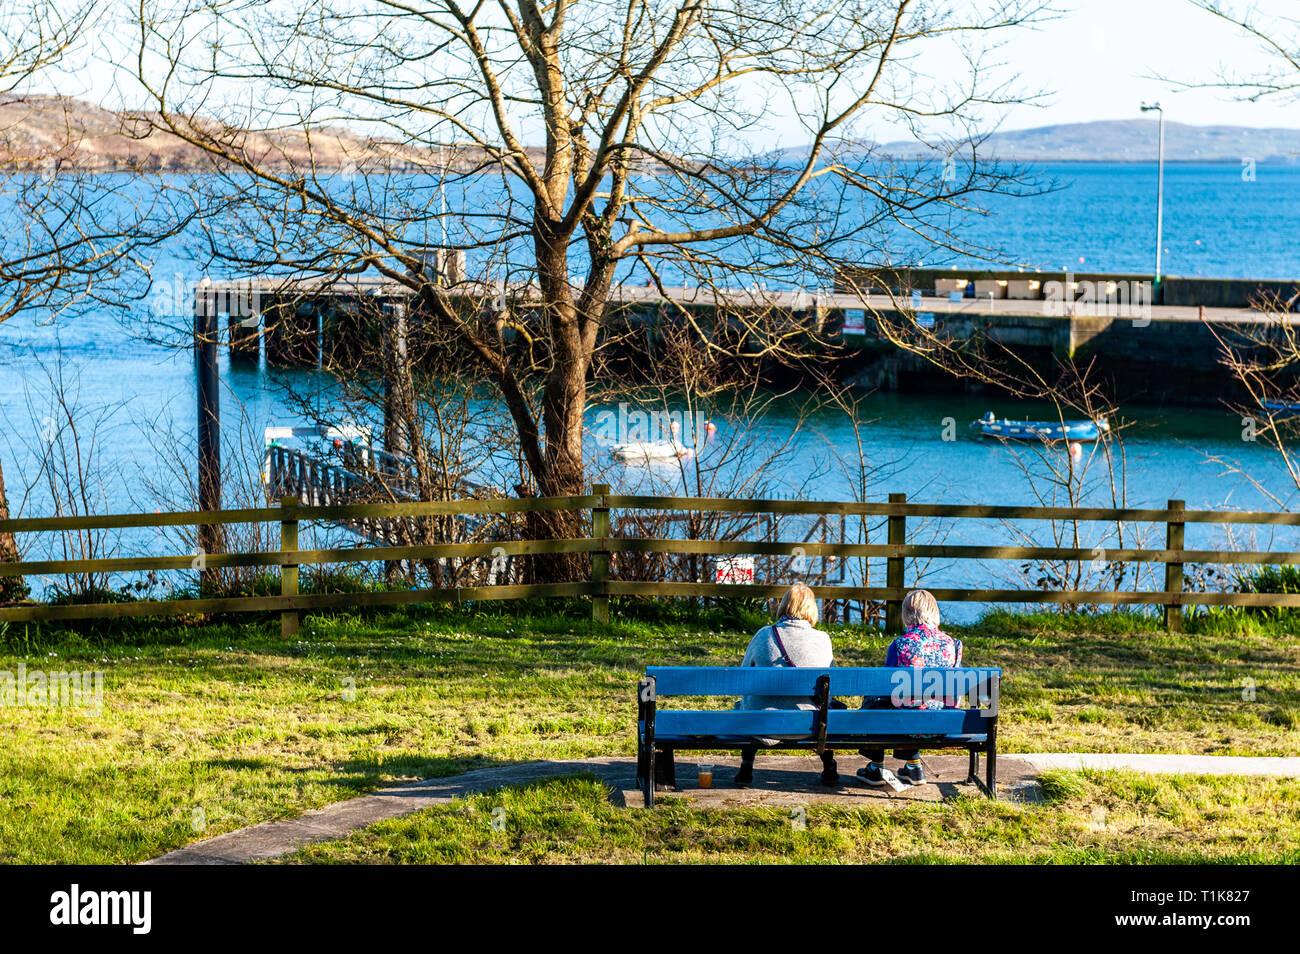 Schull, West Cork, Ireland. 27th March, 2019. Two ladies enjoy the view of Schull Harbour at the end of a beautiful day in West Cork. The remainder of the day will be sunny with highs of 12° Celsius. Credit: Andy Gibson/Alamy Live News. Stock Photo